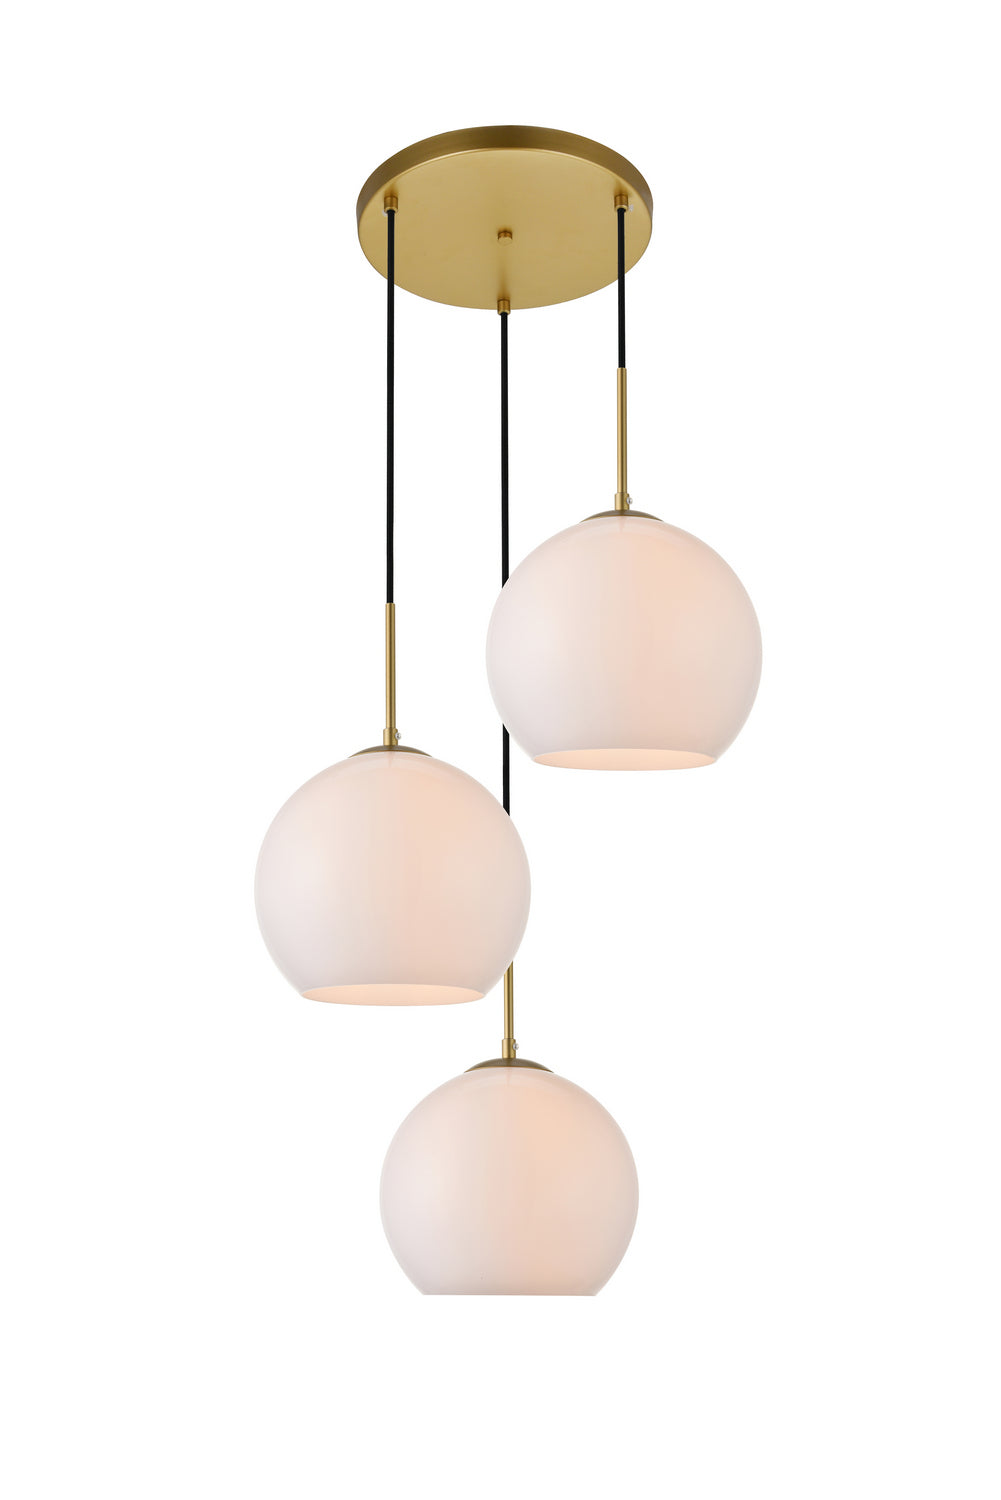 Elegant Baxter LD2215BR Pendant Light - Brass And Frosted White